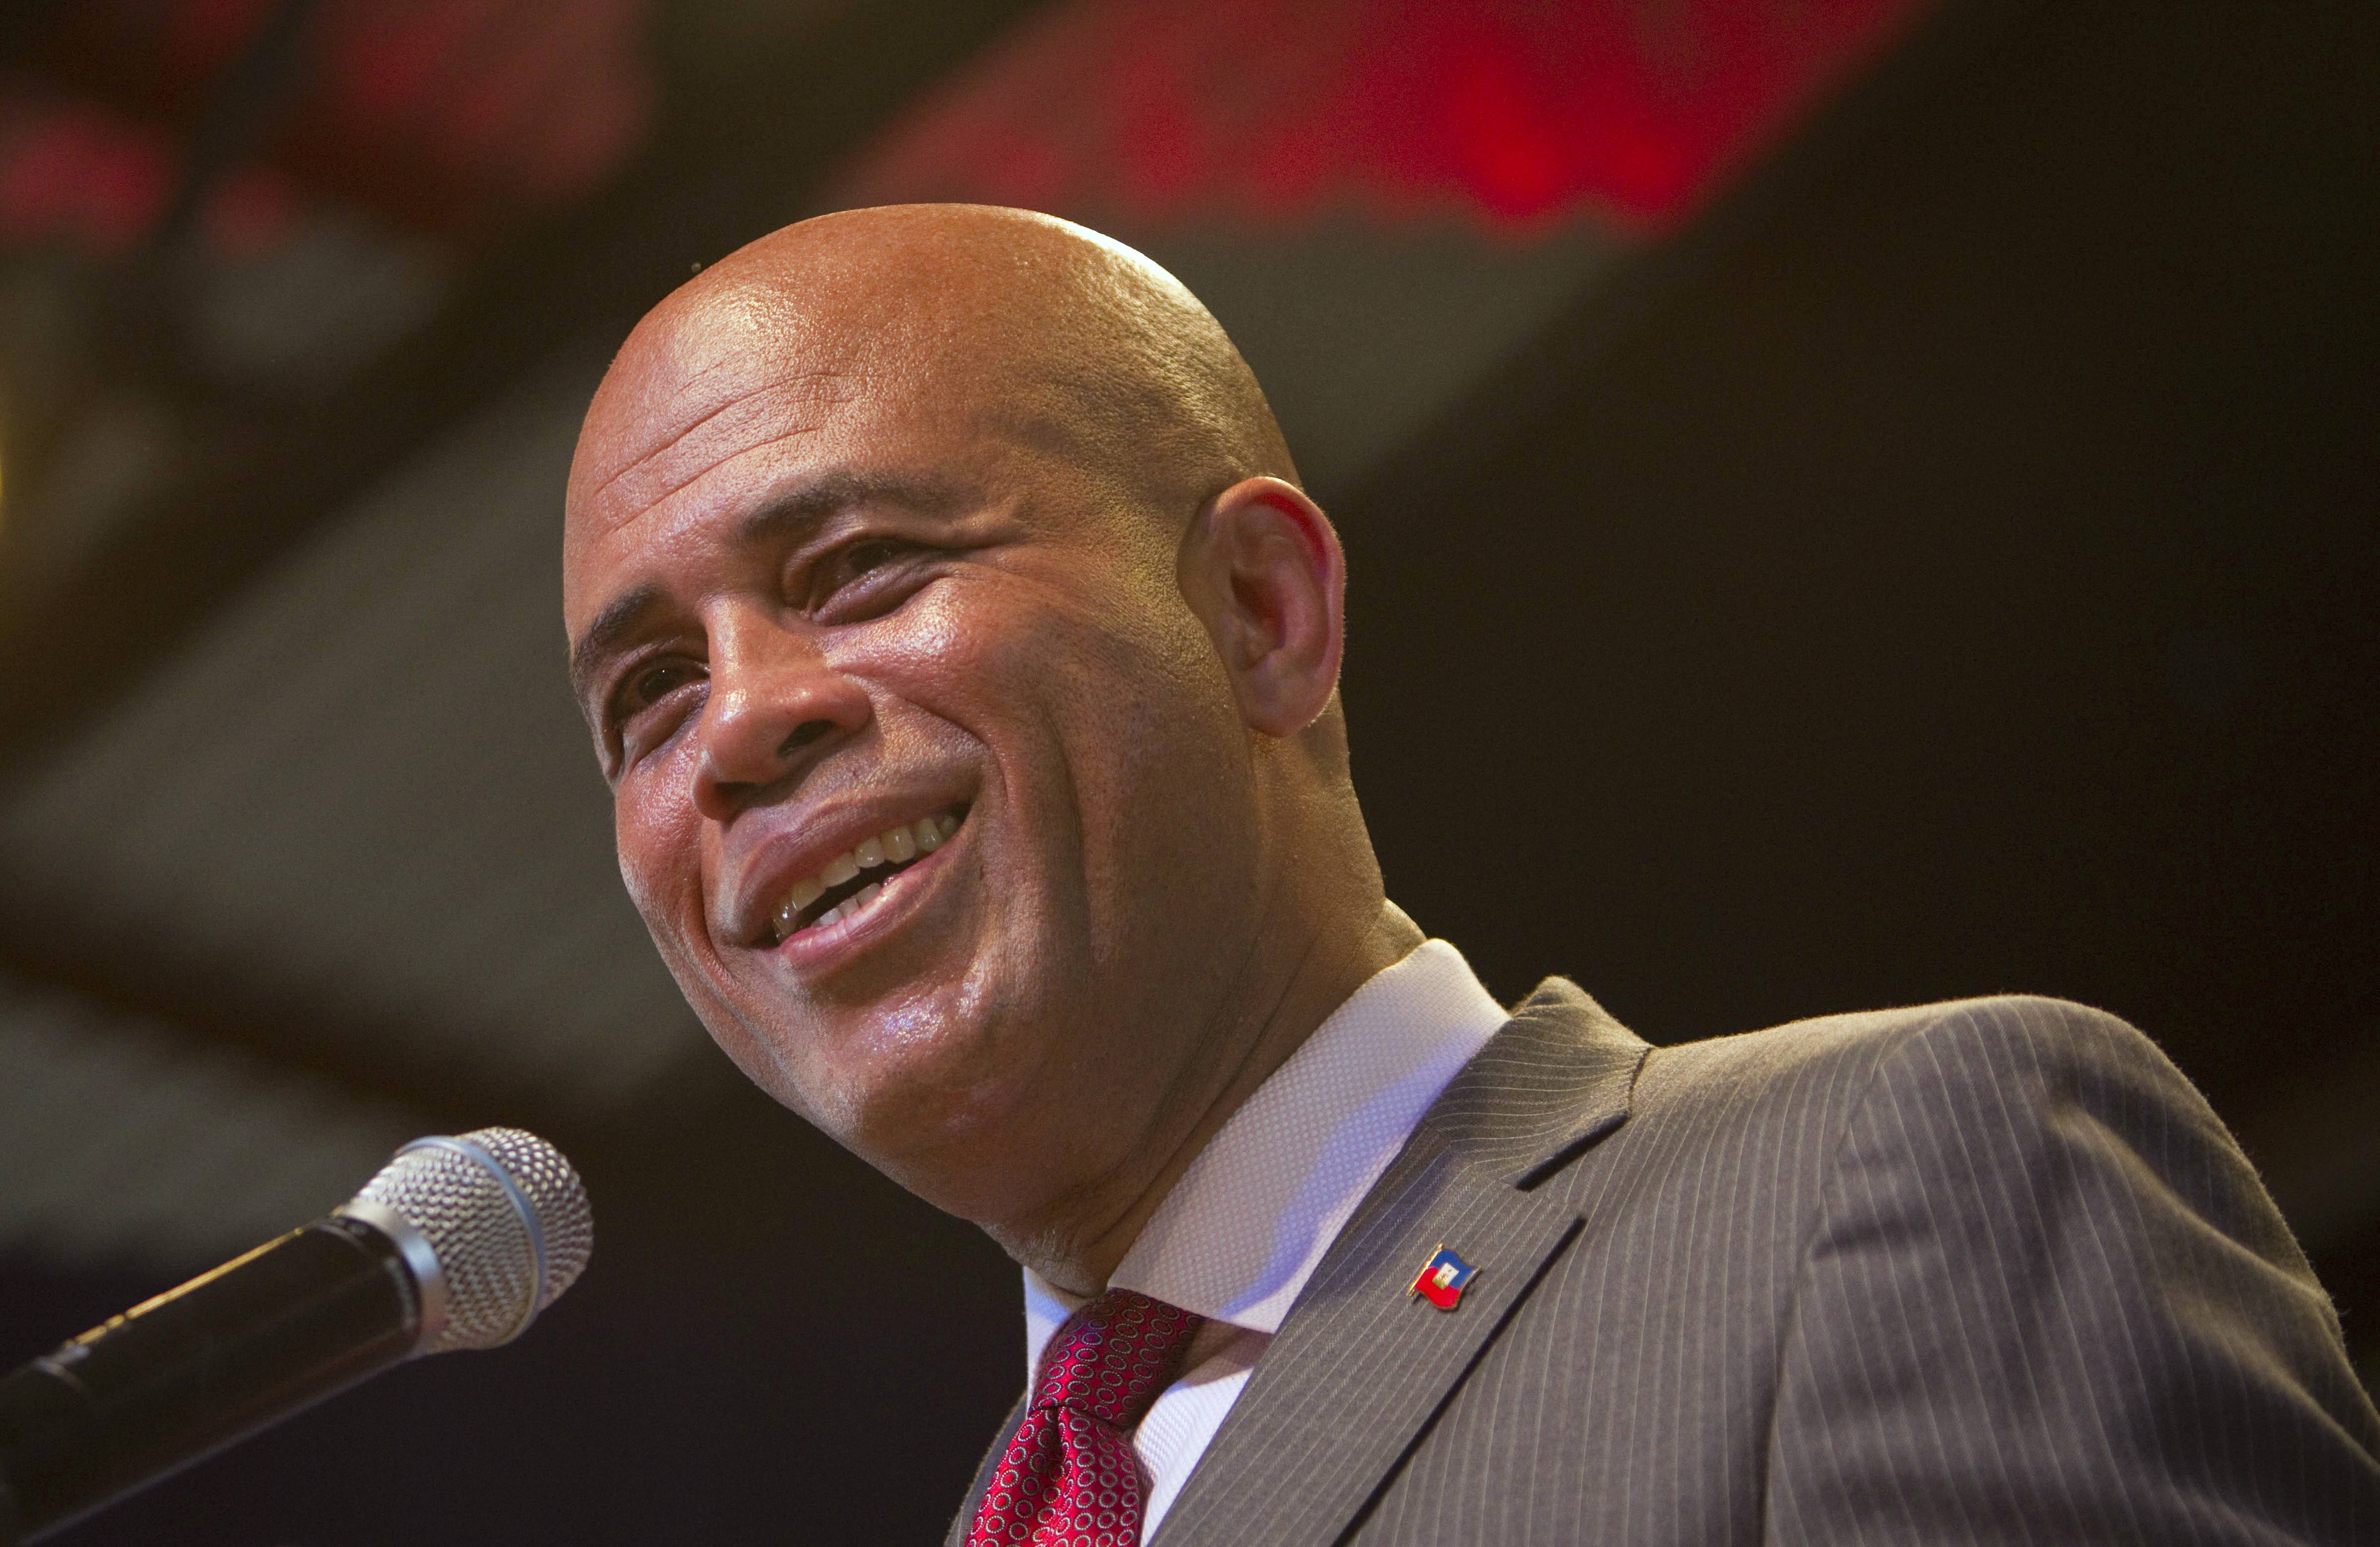 Haiti’s New President - Former musician Michel “Sweet Micky” Martelly captured nearly 68 percent of the vote in Haiti’s presidential election runoff, defeating former first lady Mirlande Manigat, according to preliminary election results released Monday night. (Photo: AP Photo/Ramon Espinosa)